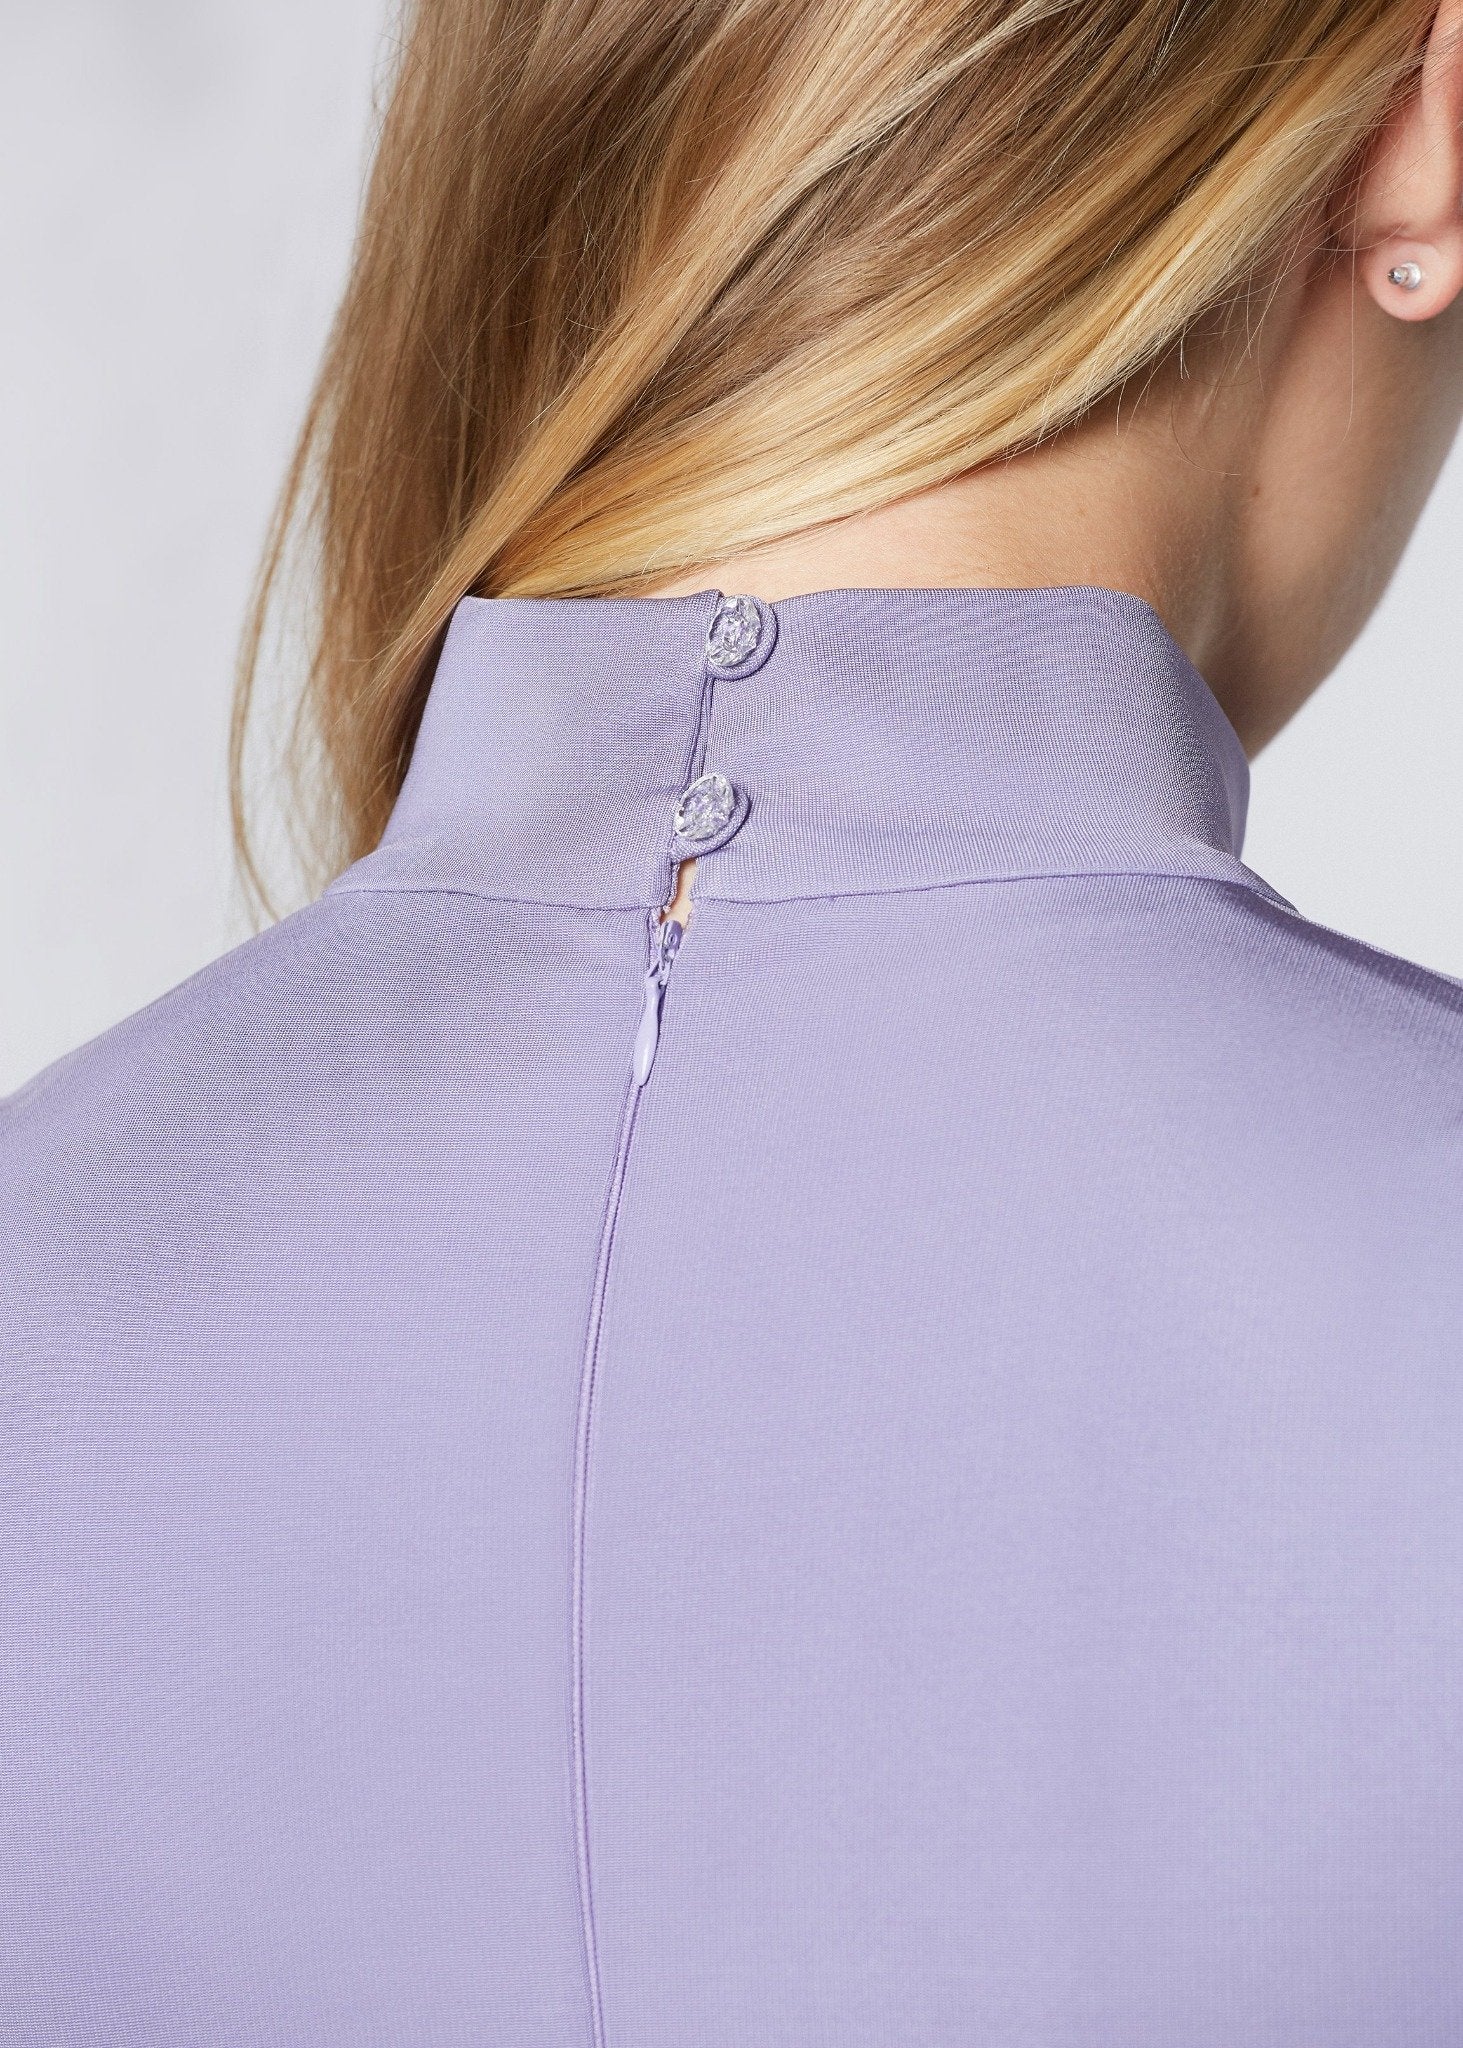 Detailed back view of a woman wearing an asymmetric mock neck fuller bust dress with 3/4 length sleeves and side seam pockets in lilac stretch viscose fabric by Miriam Baker.